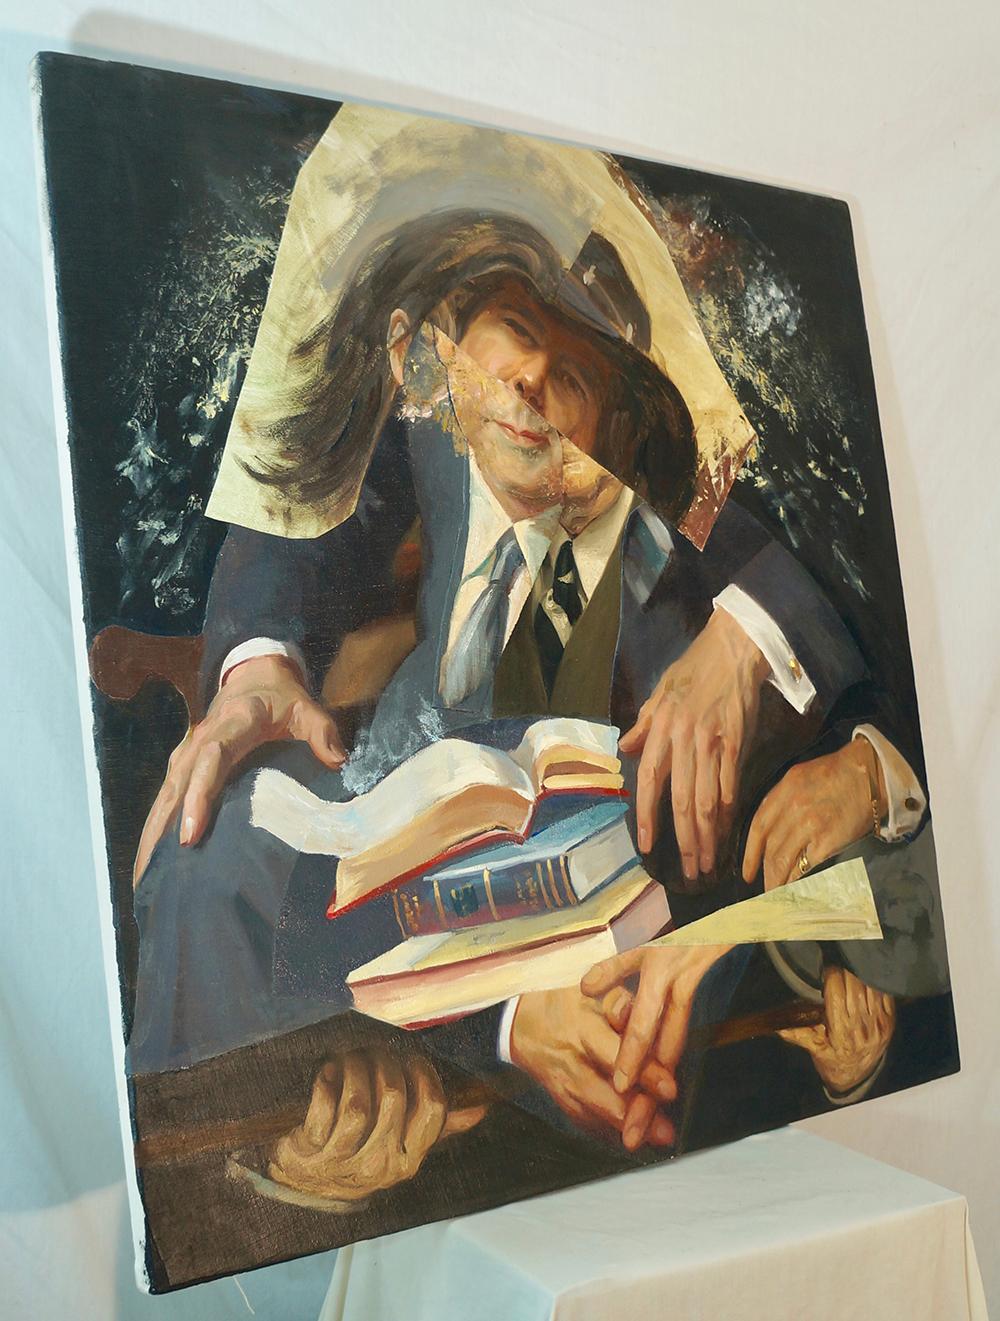 John Baker’s “Cramming for the Exam” is an acrylic portrait painting on canvas with collage 30 inches by 30 inches in dark blues and straw yellows. Although sparks of understanding flicker and fall behind the head of the hapless student, time is too